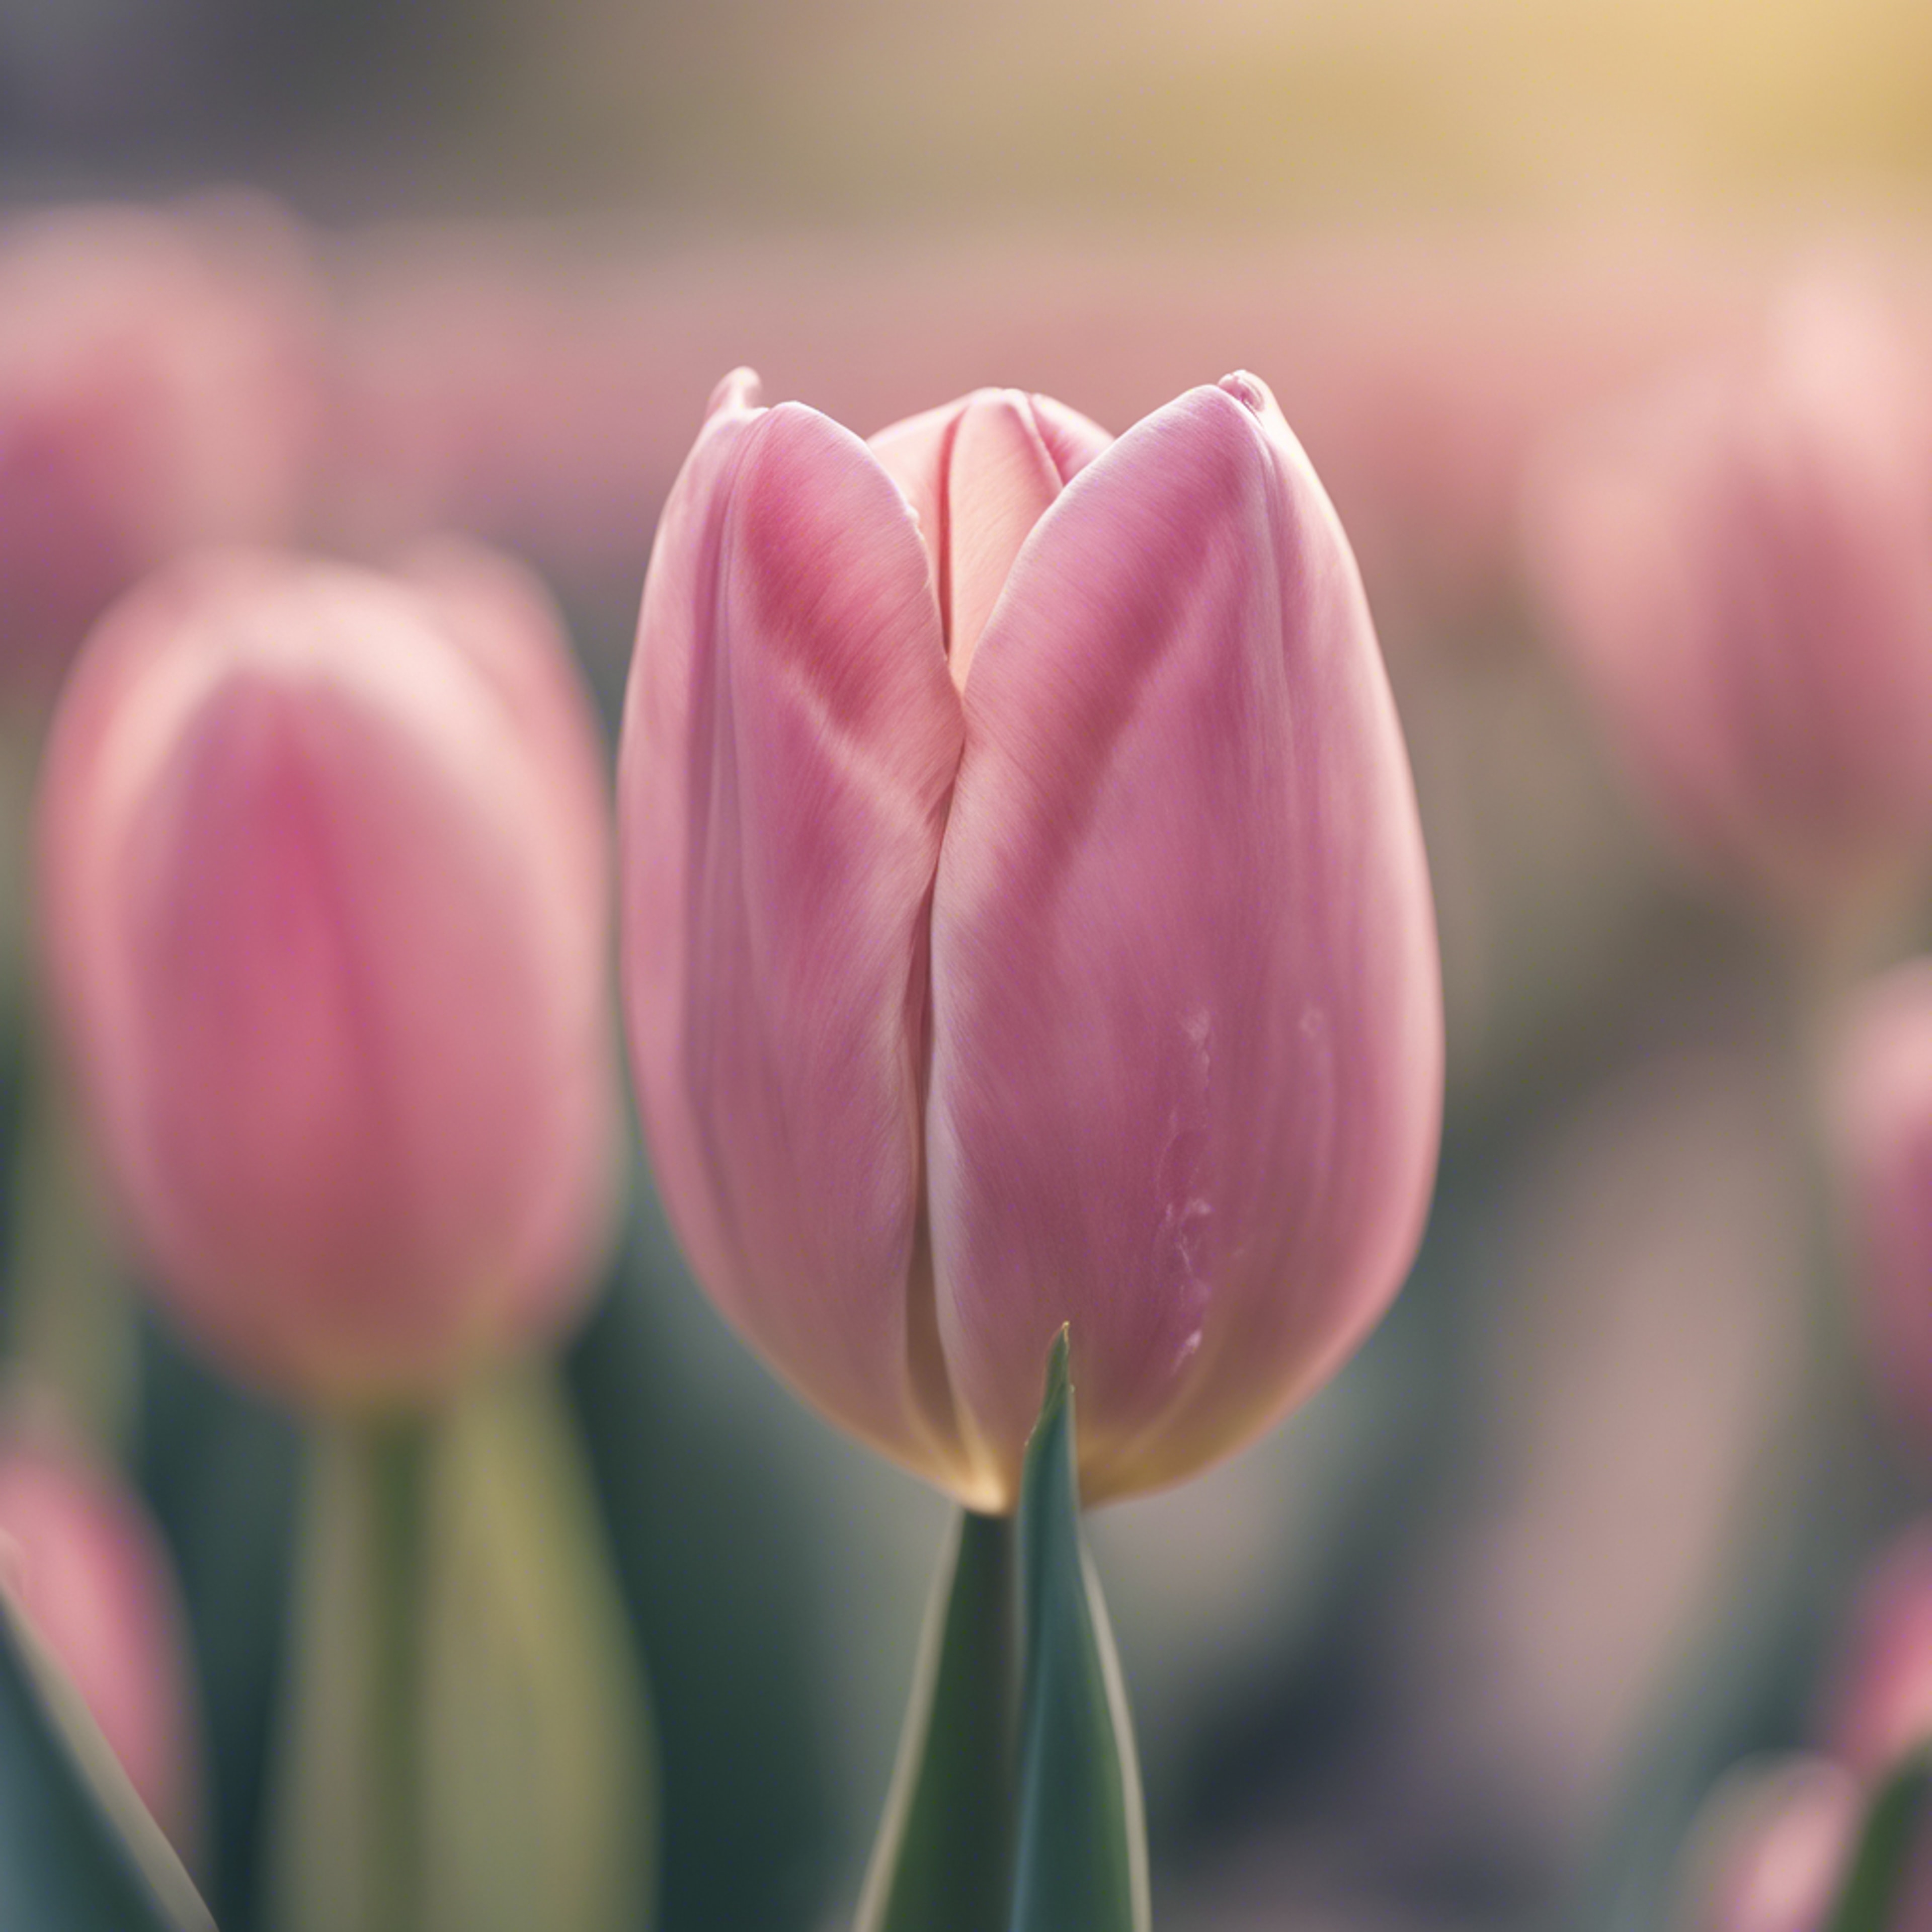 A close-up of a lone pink tulip against a soft and blurry pastel background ផ្ទាំង​រូបភាព[4132f8cb968043e28bd5]